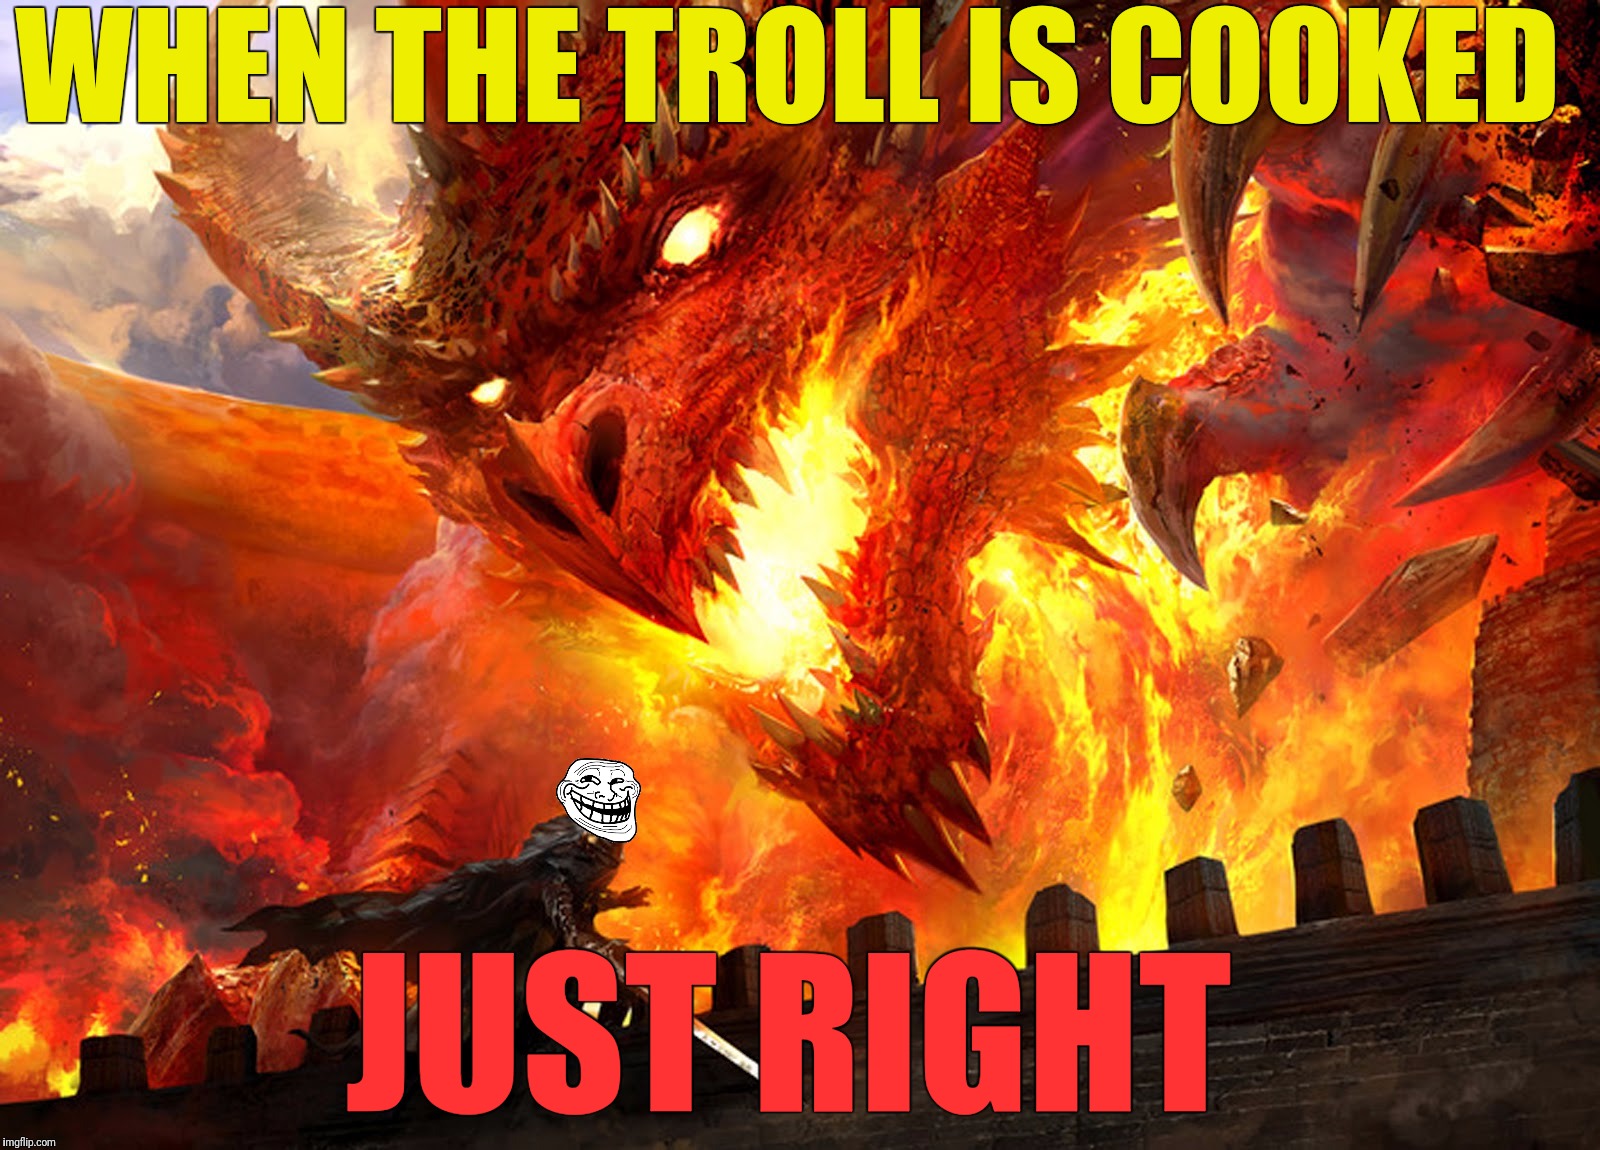 Red_Dragon is having a BBQ | WHEN THE TROLL IS COOKED JUST RIGHT | image tagged in memes,red dragon,barbeque,troll face | made w/ Imgflip meme maker